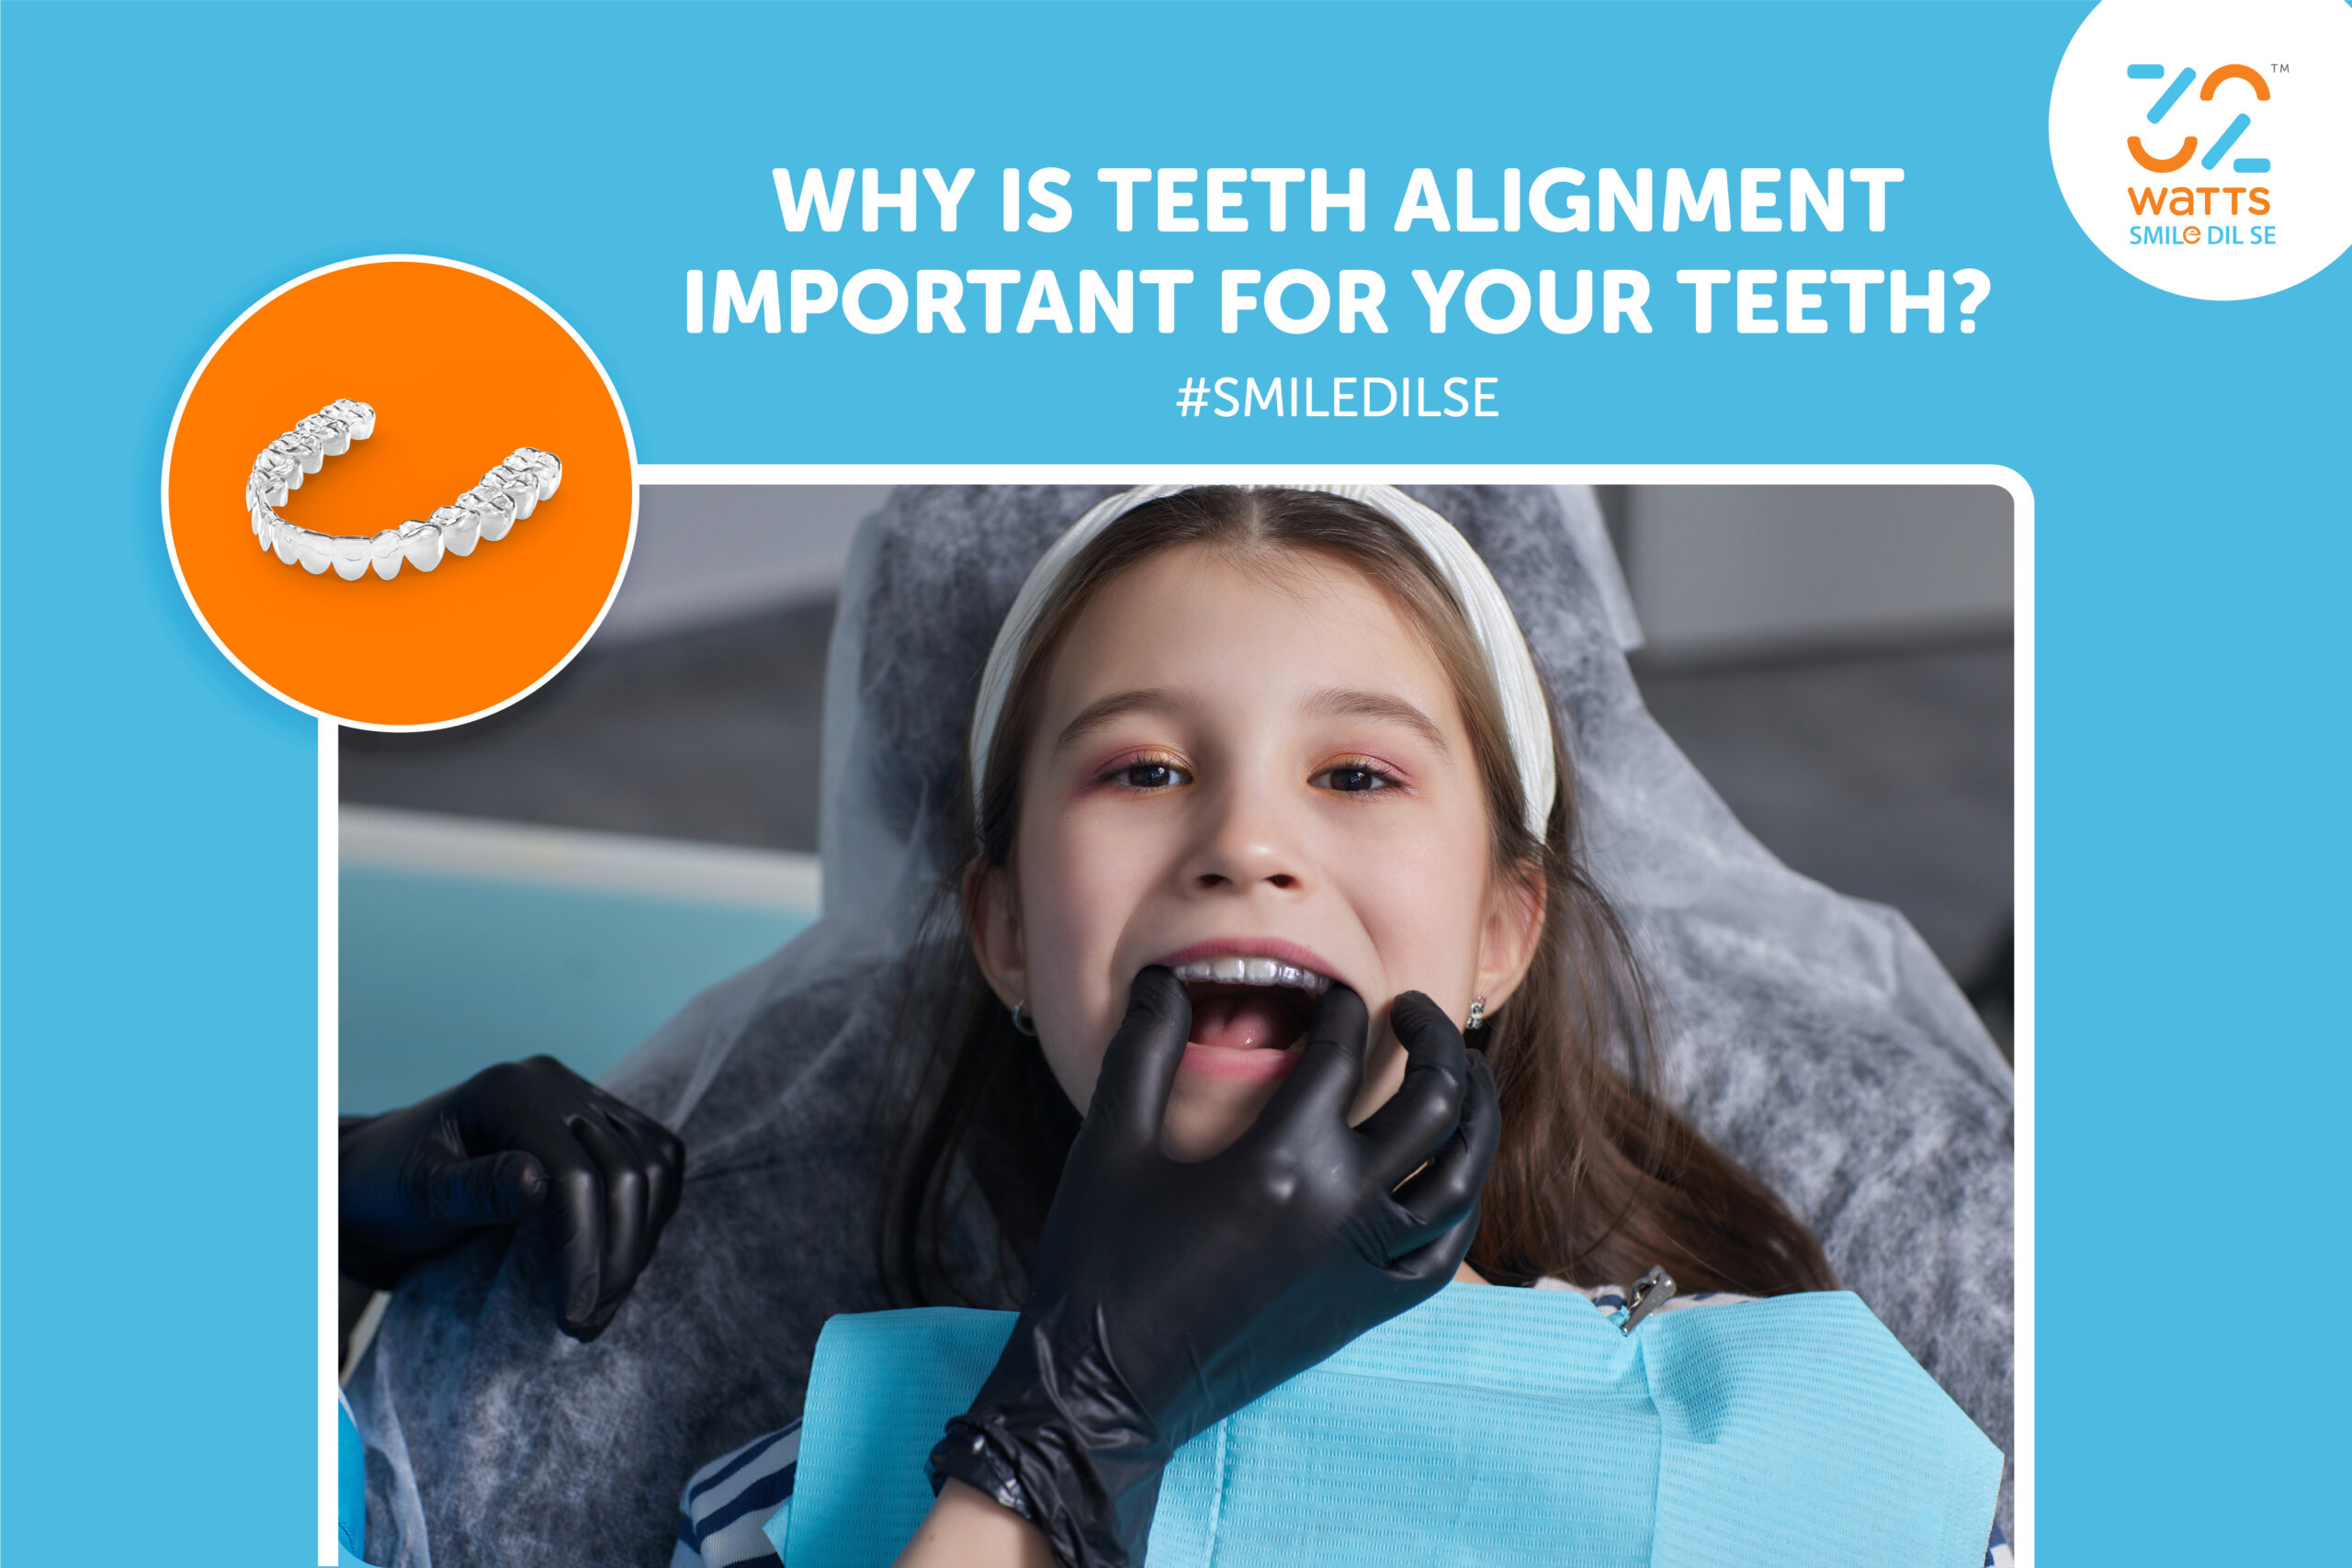 Why is teeth alignment important for your teeth?